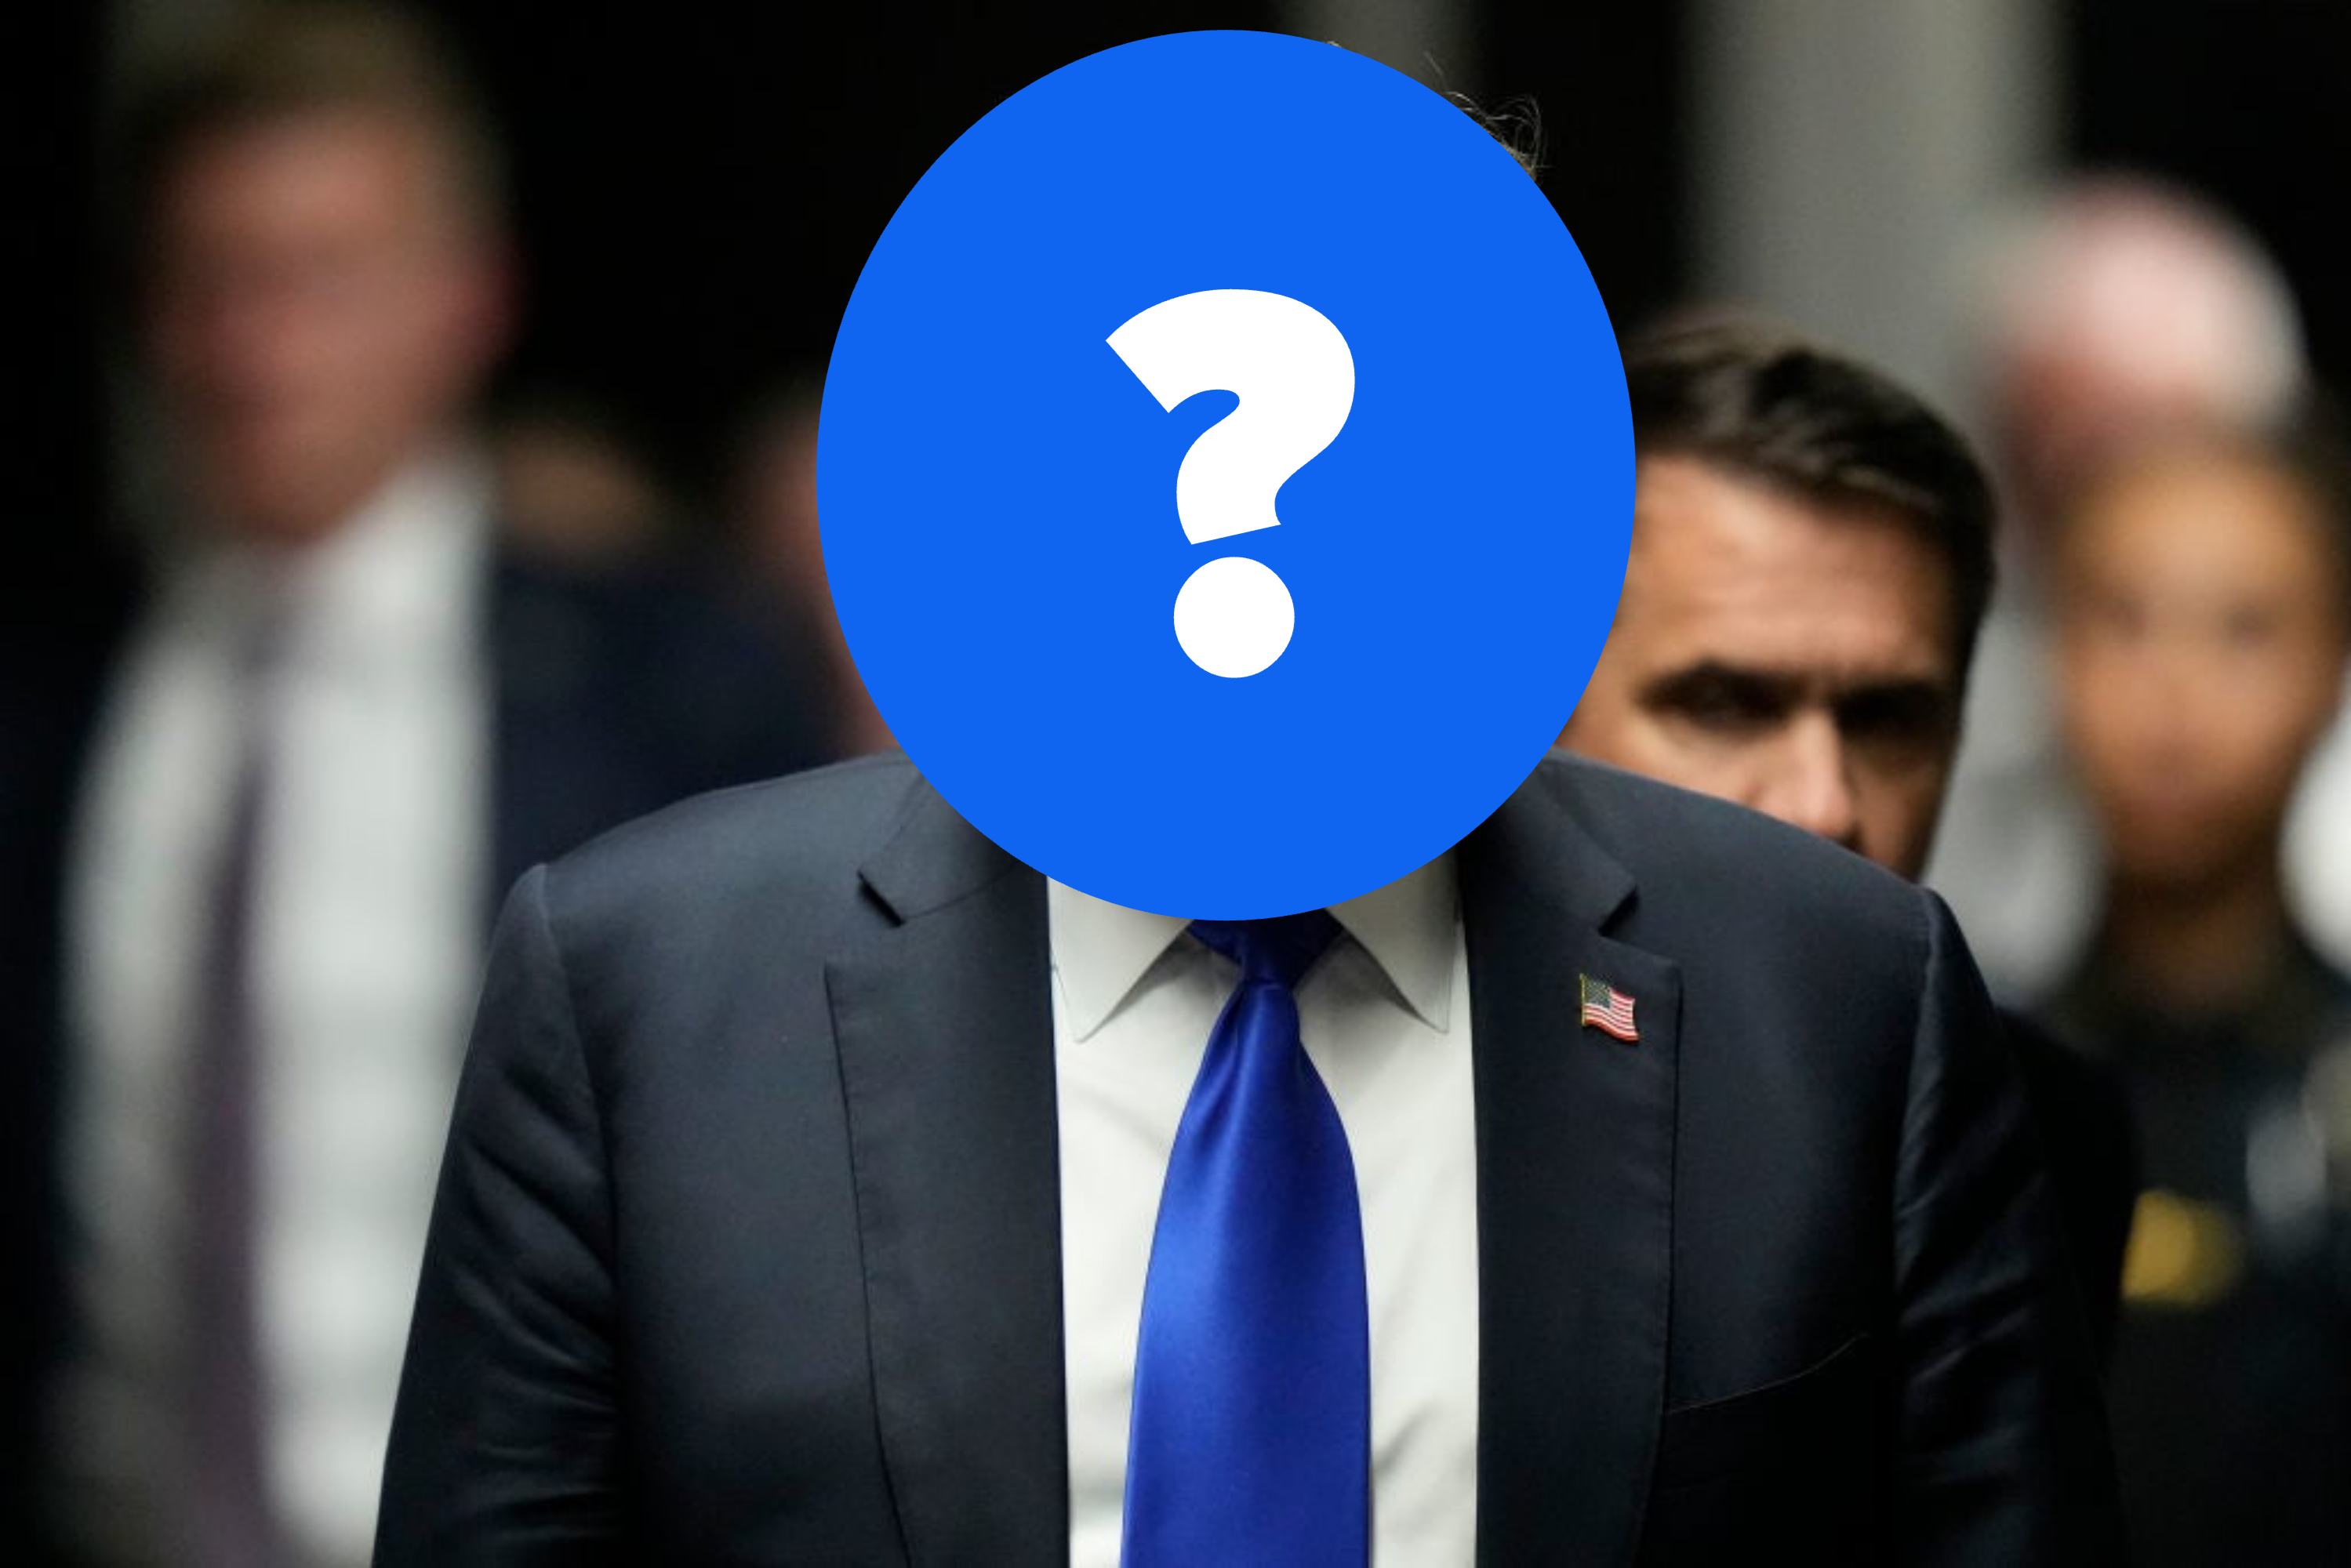 Donald Trump with eyes closed, wearing a dark suit, white shirt, and blue tie, stands with people in the background, his face is obscured by a blue circle with a question mark on it